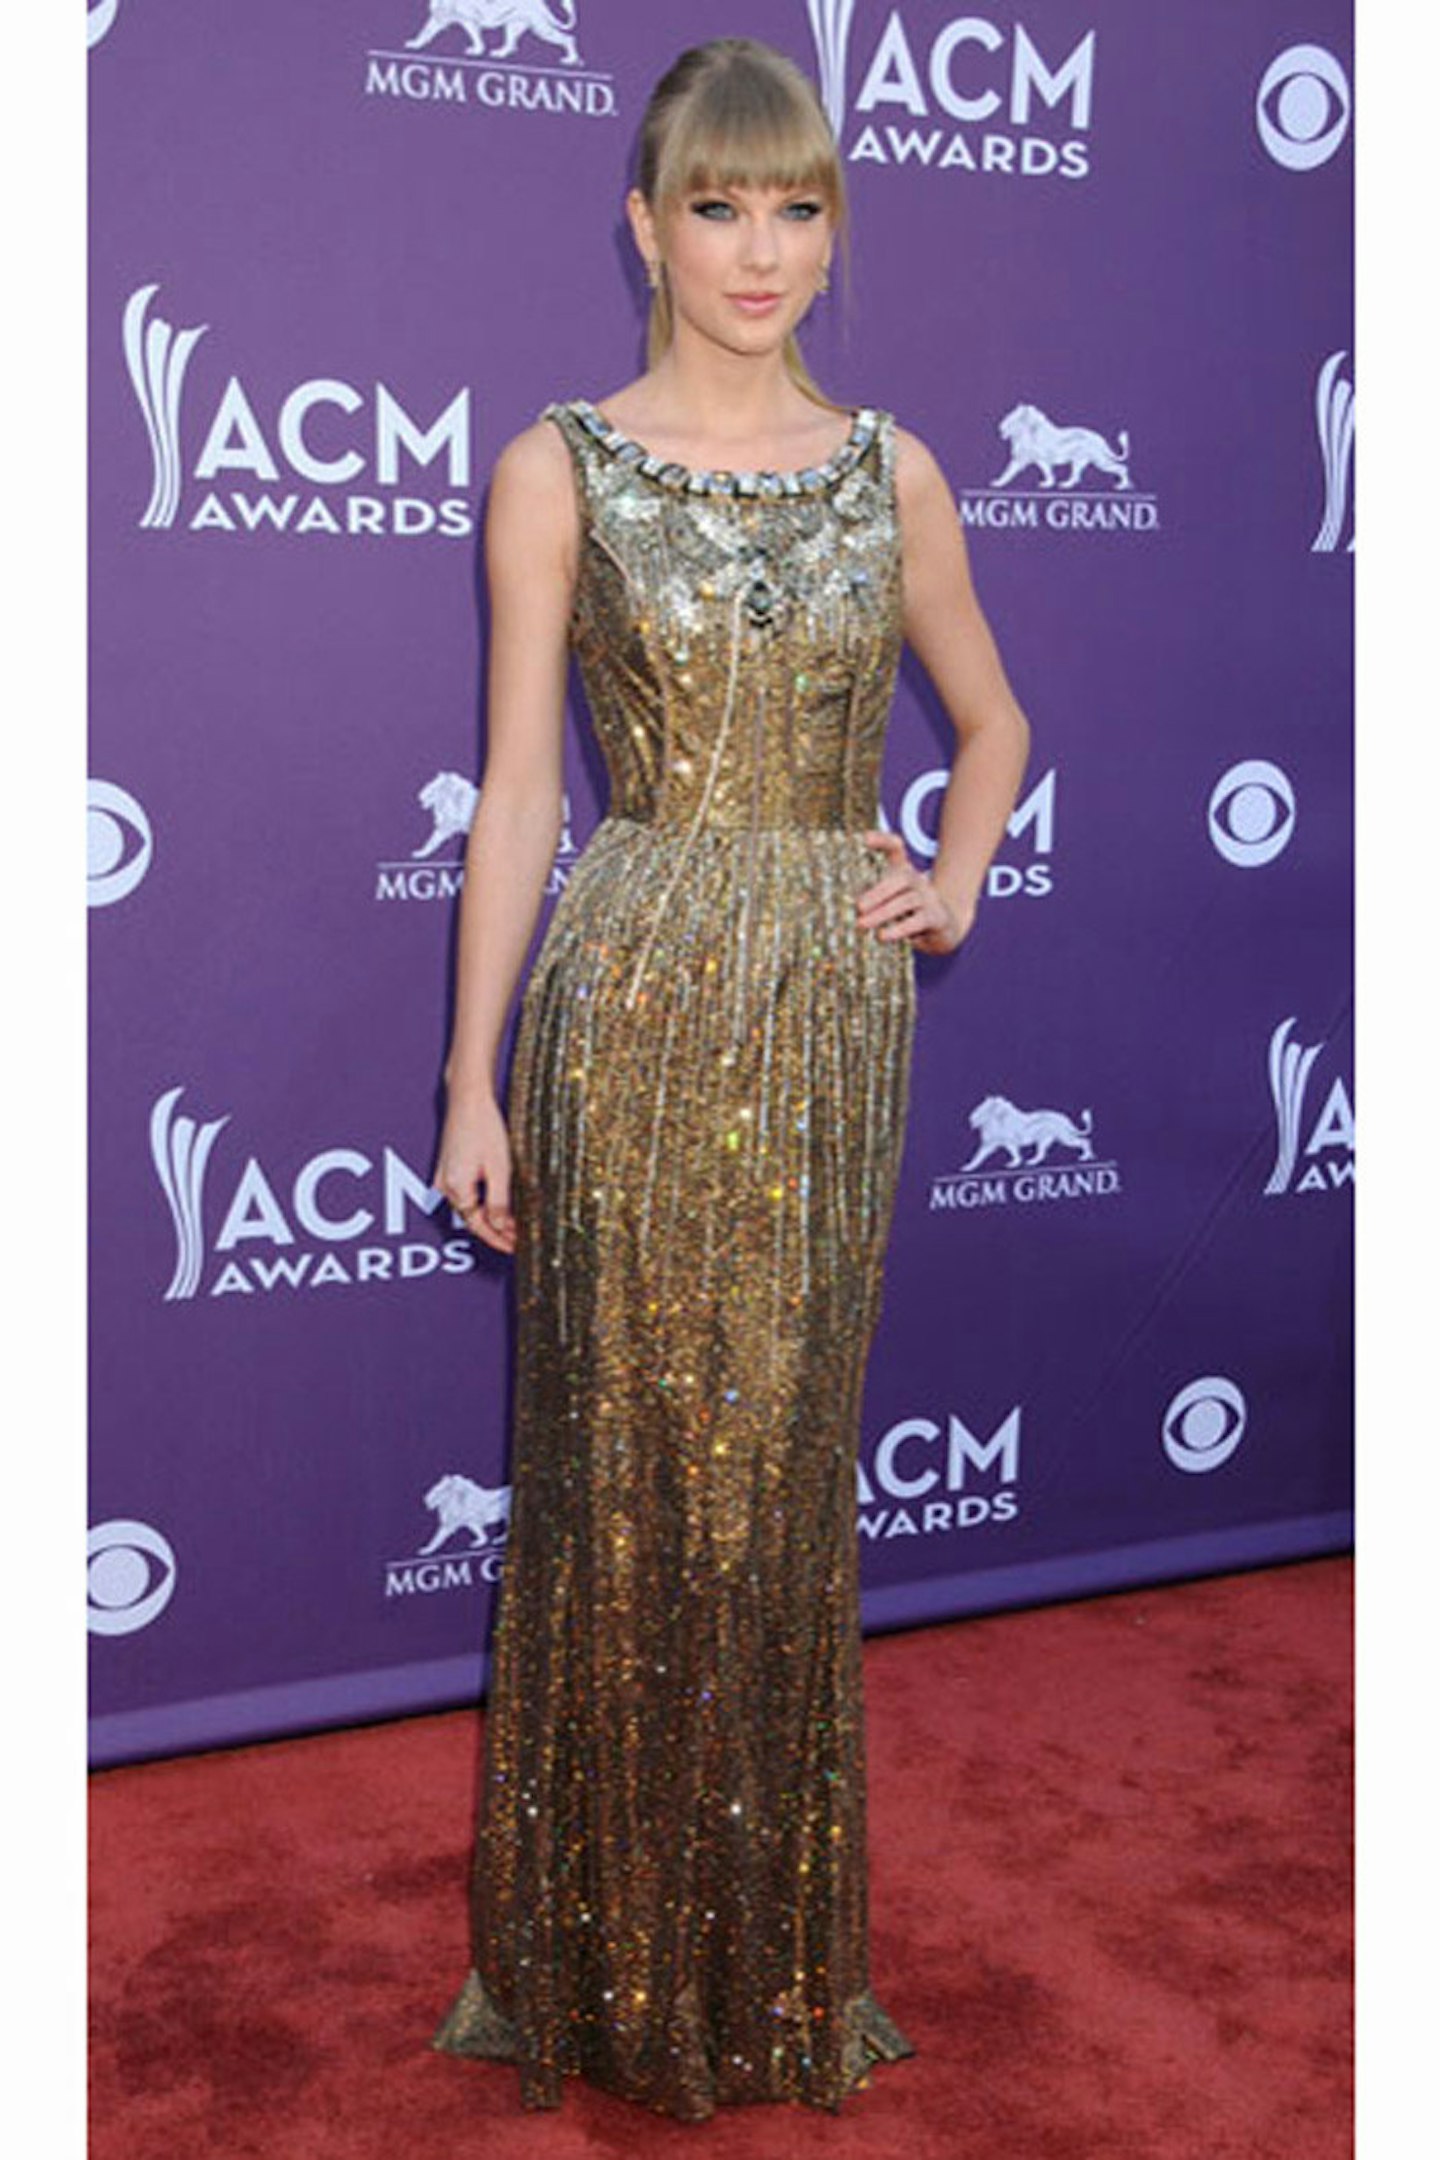 Taylor Swift in Dolce & Gabbana at the 48th Annual Academy of Country Music Awards - April 2013